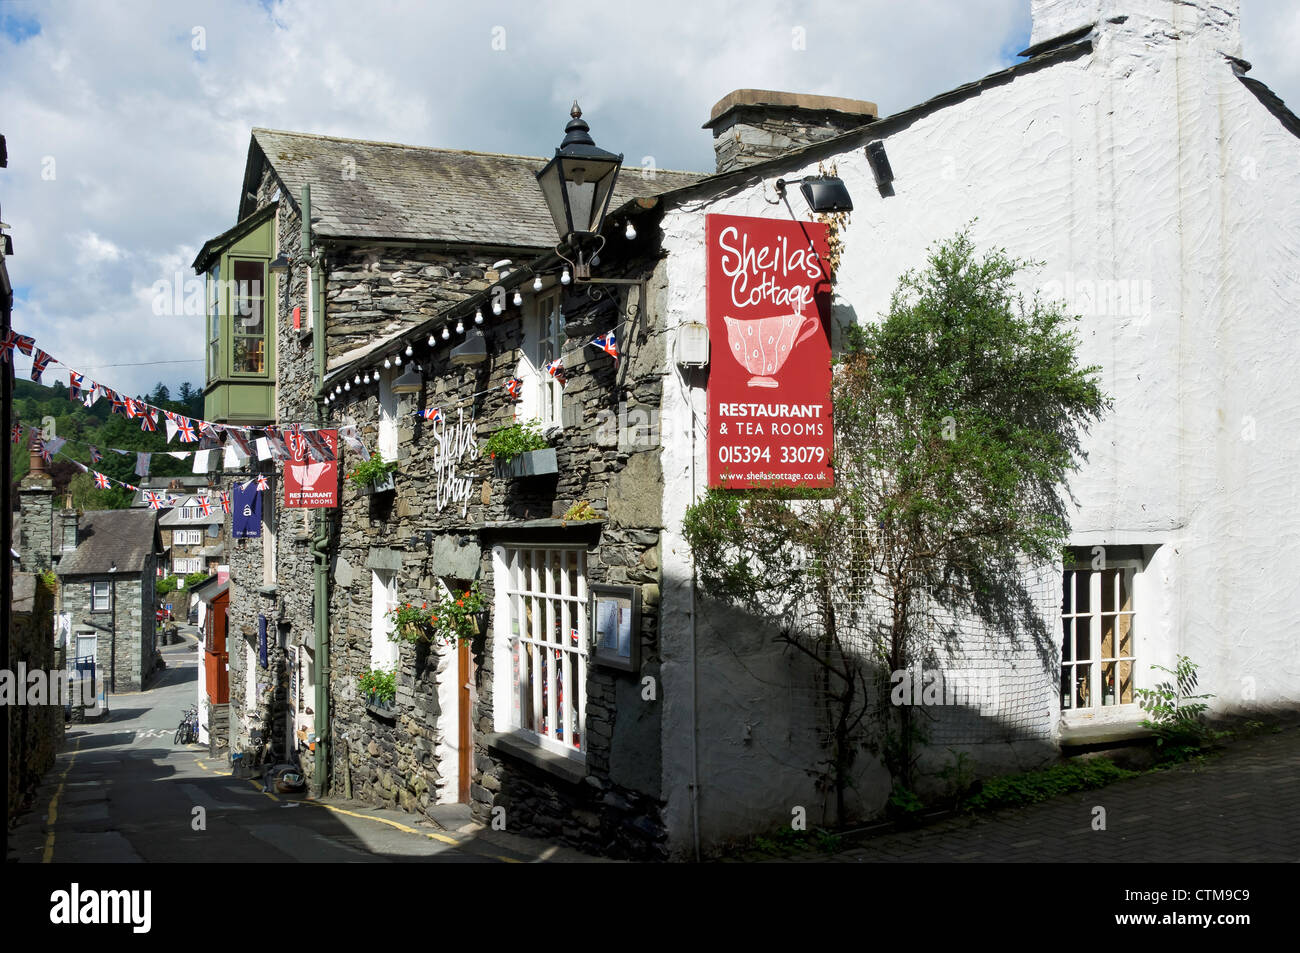 Restaurant and tea rooms cafe in the town centre in summer Ambleside Cumbria England UK United Kingdom GB Great Britain Stock Photo